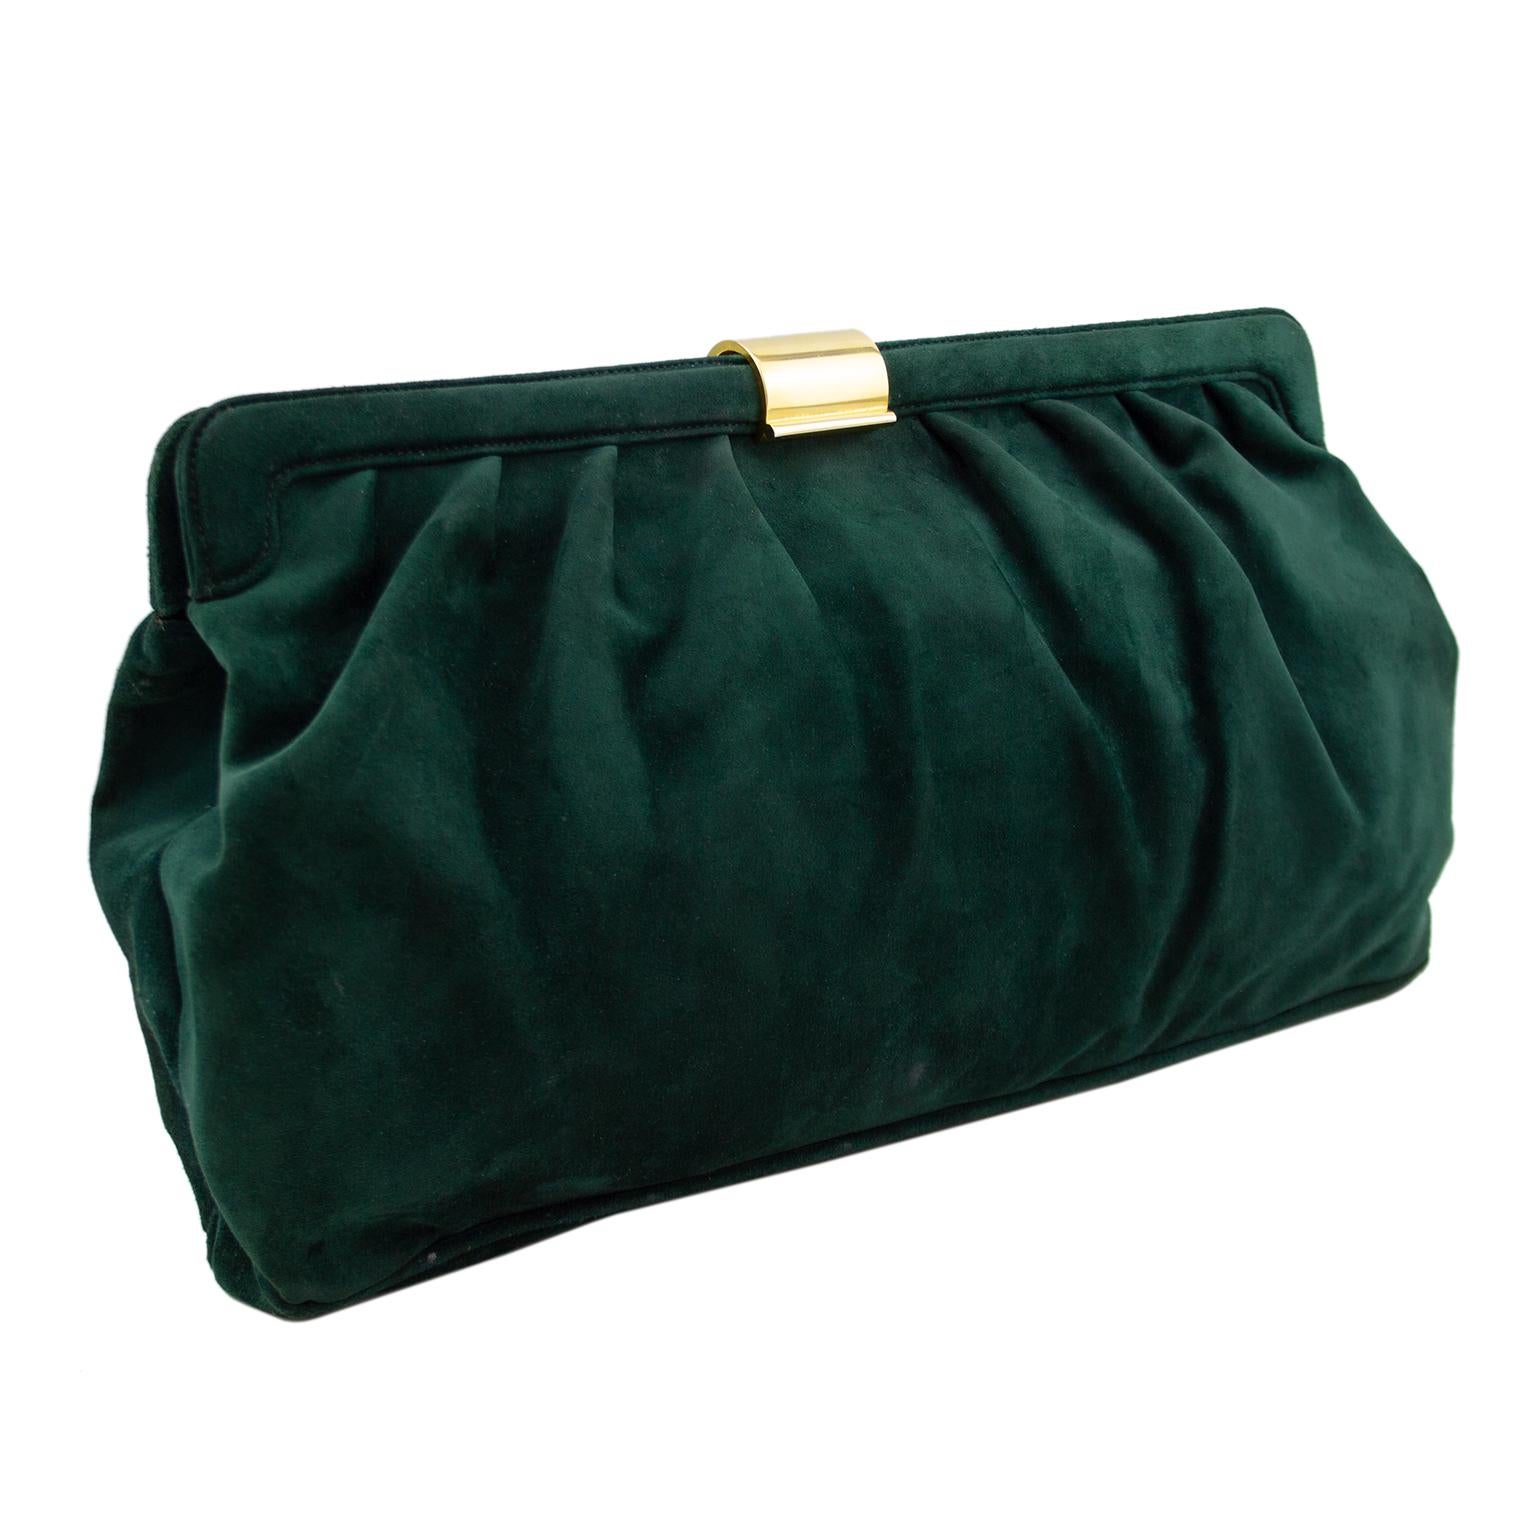 Stunning oversized Salvatore Ferragamo soft clutch from the 1980's. The deep and rich dark green suede is perfectly contrasted by the warm gold tone metal hardware. Rectangular frame style with gathering. The gold tone closure lifts up to open the